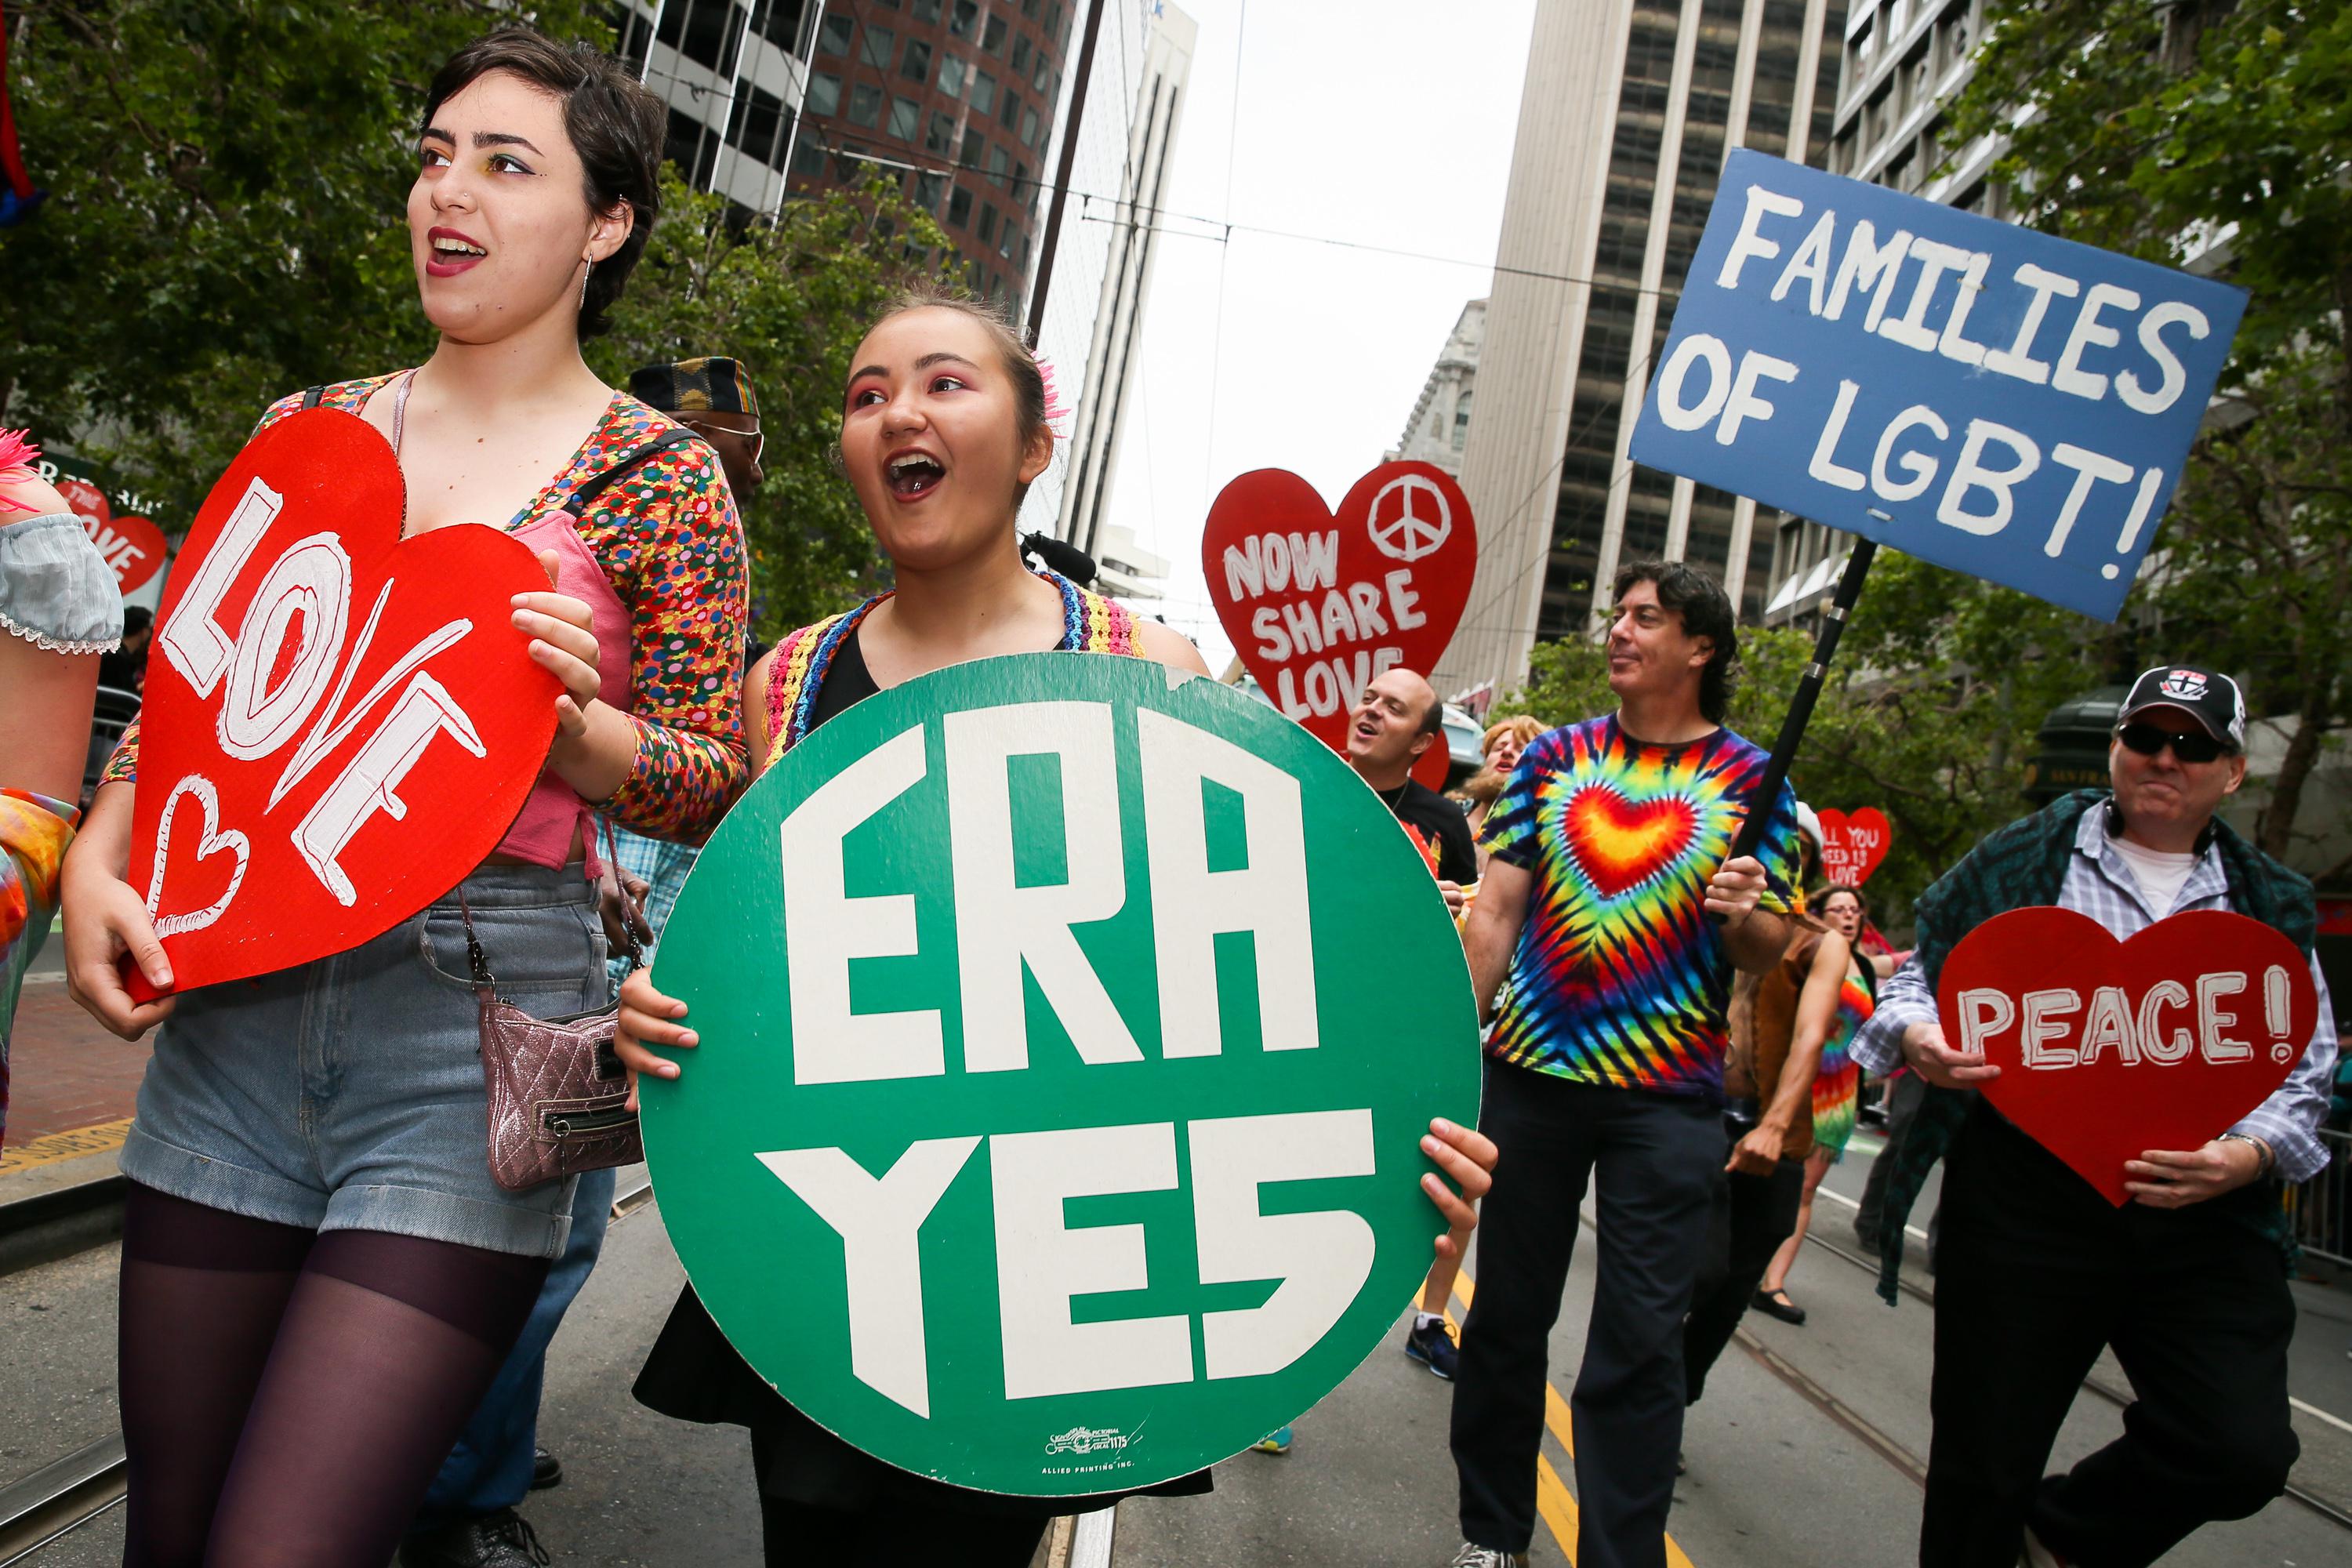 A marcher holds an "ERA YES" sign amid others holding pro-LGBTQ signs in the pride parade.